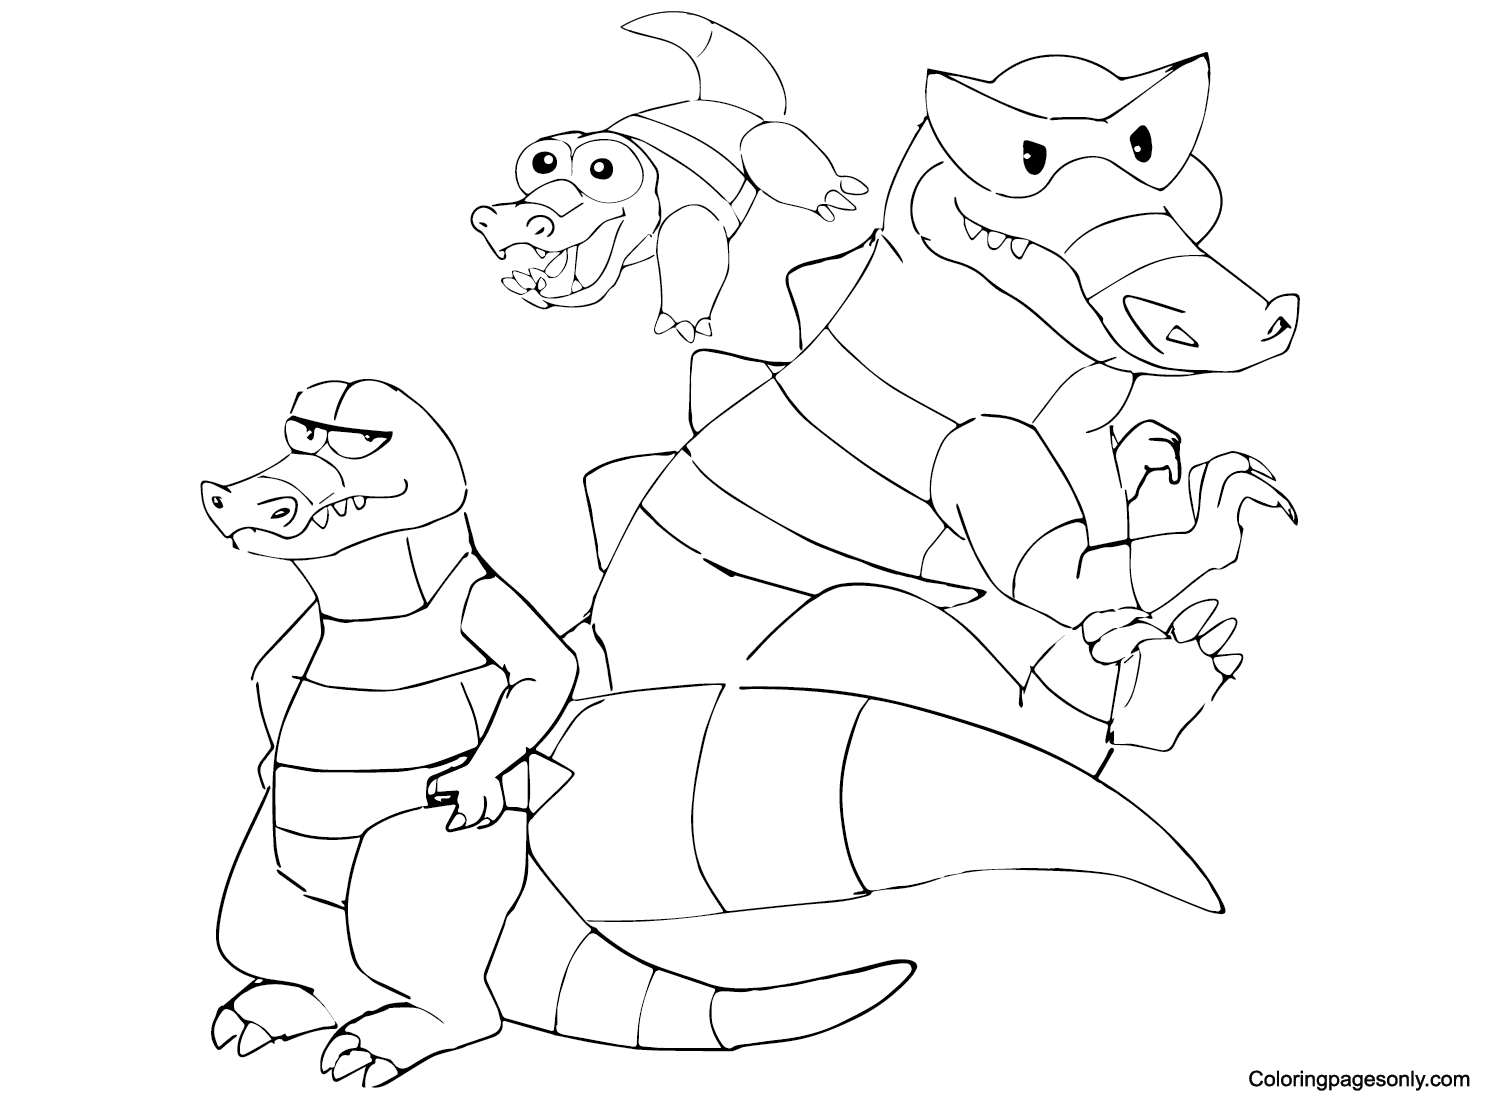 Krookodile Free Coloring Page